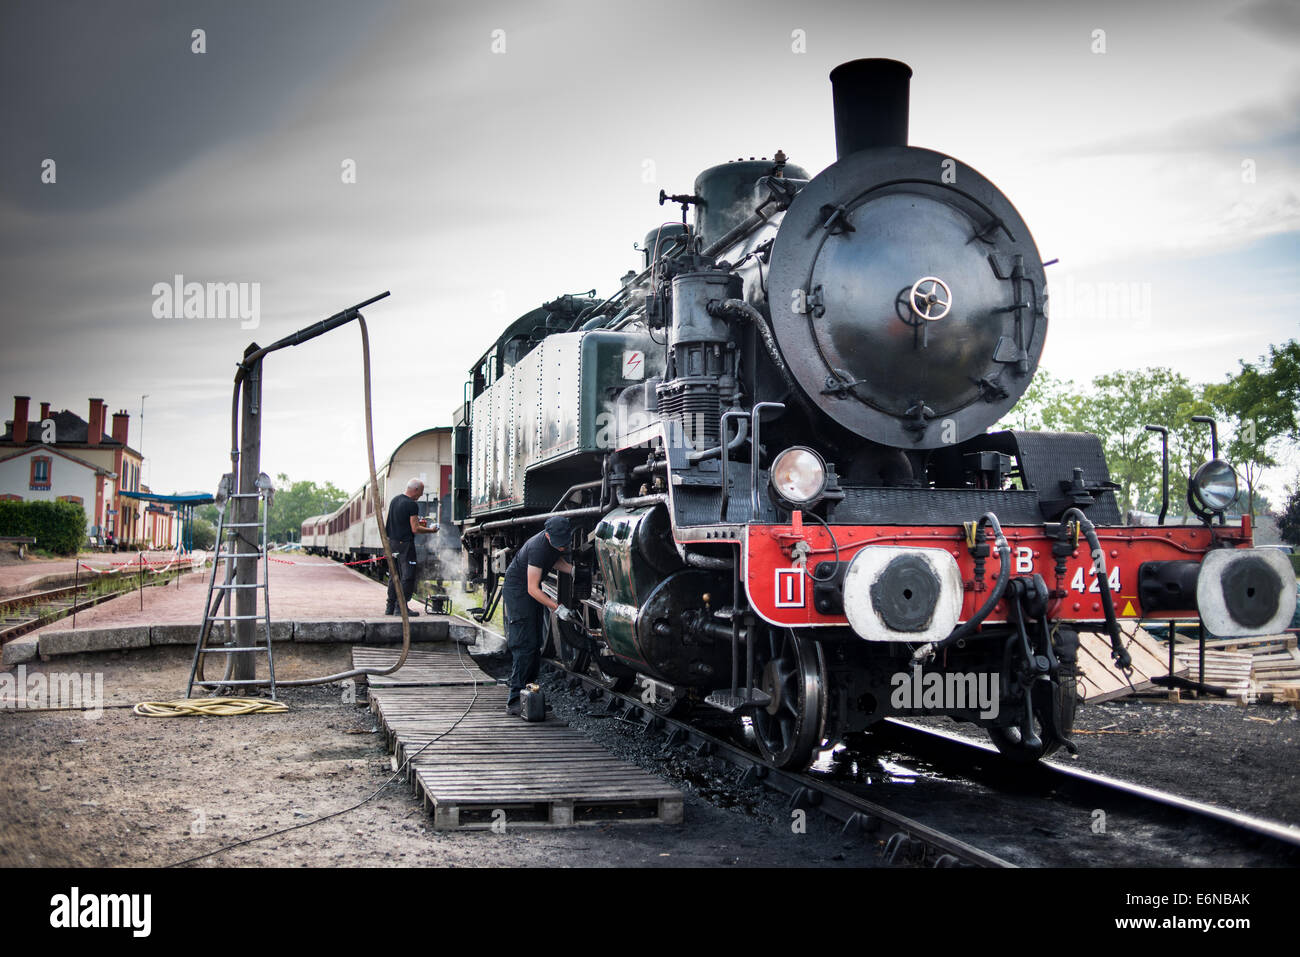 Historic steam locomotive 'Pacific PLM 231 K 8' of 'Paimpol-Pontrieux' train Brittany France Stock Photo